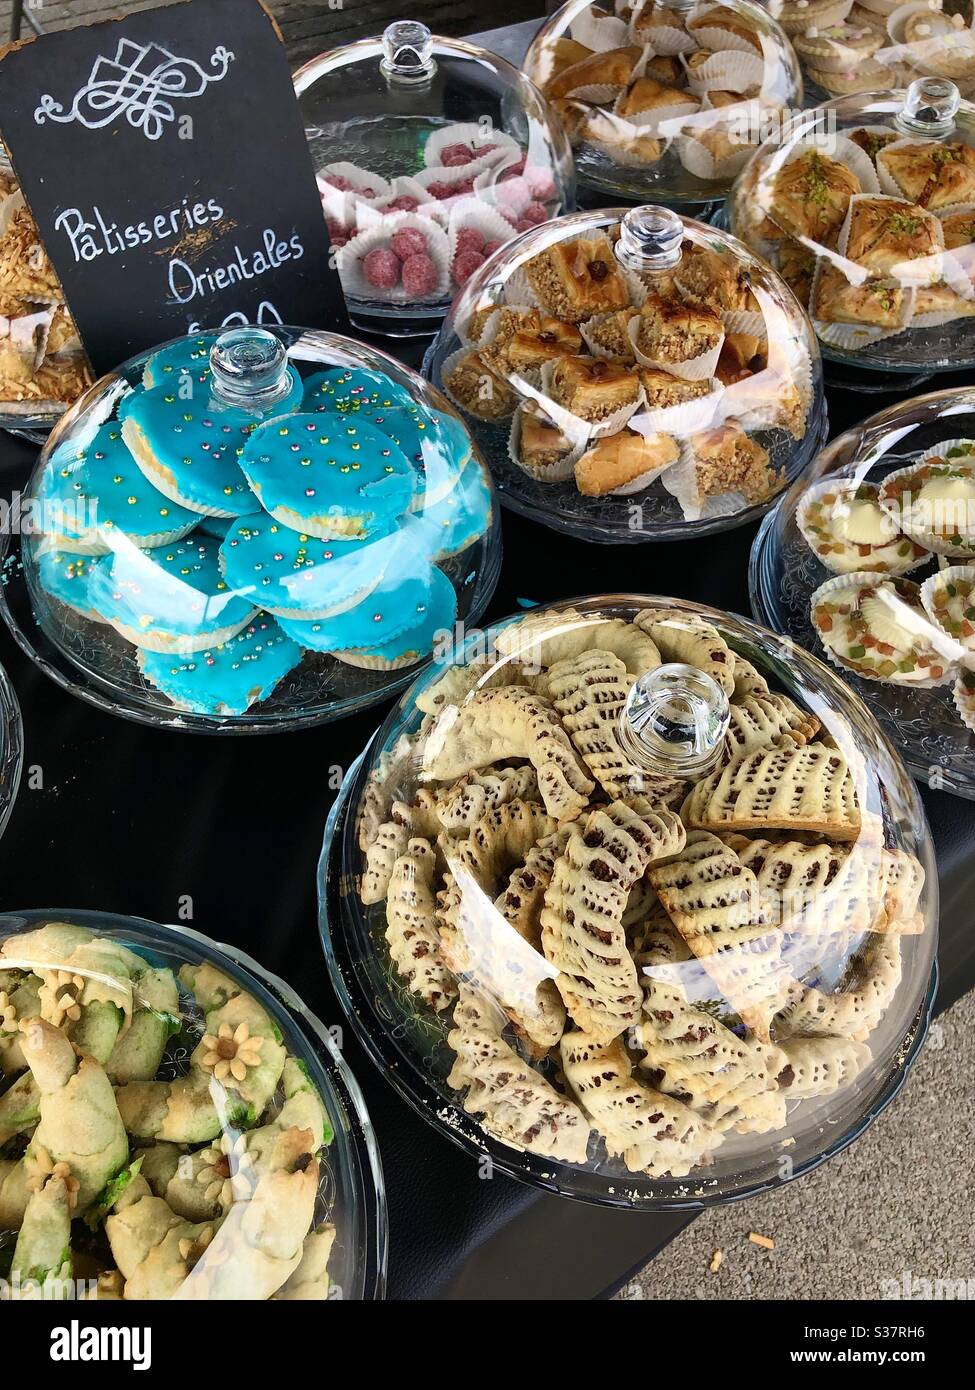 Display of Middle Eastern cakes at the Arab market in Châtellerault, Vienne (86), France. Stock Photo